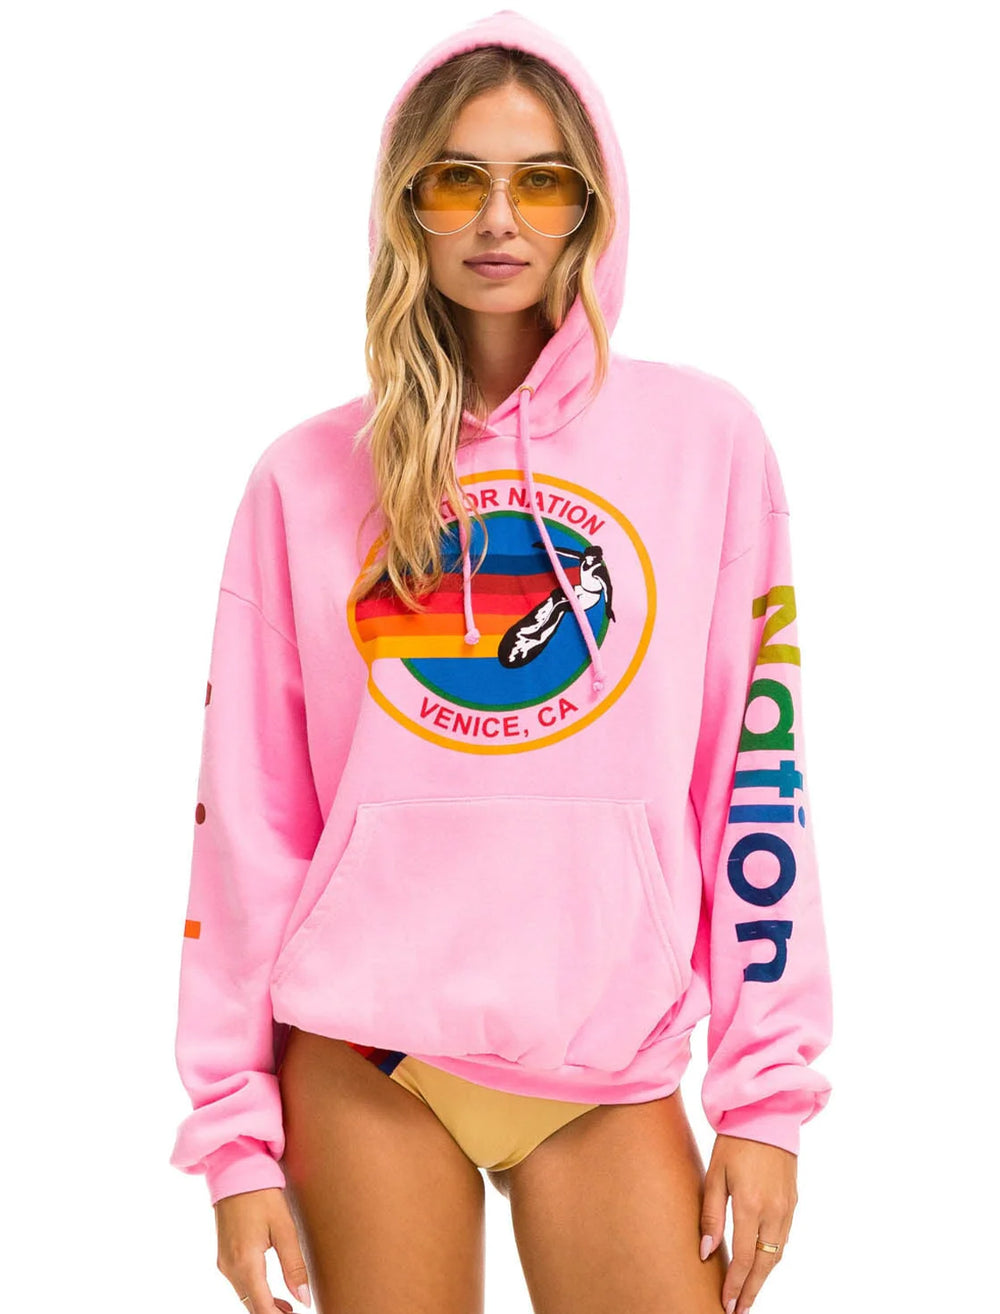 Model wearing Aviator Nation's pullover hoodie relaxed in neon pink.